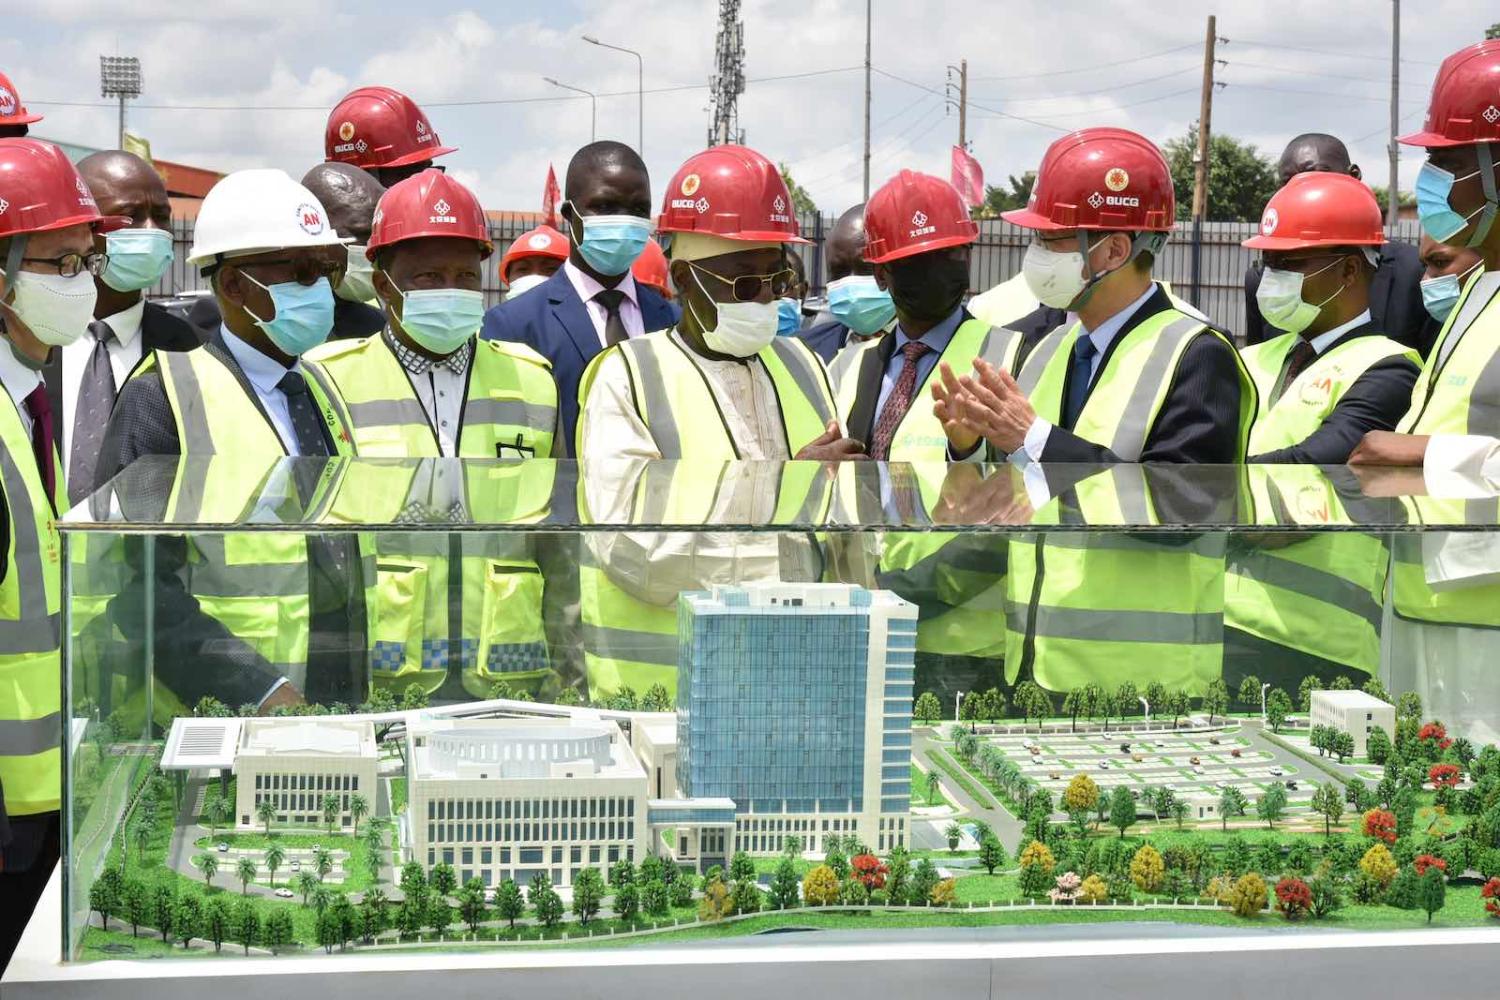 Cameroonian officials and the Chinese Ambassador to Cameroon visit the site of the country’s new National Assembly building, a China-aided project under construction in Yaounde, Cameroon, 23 March 2021 (Jean Pierre Kepseu/Xinhua via Getty Images)